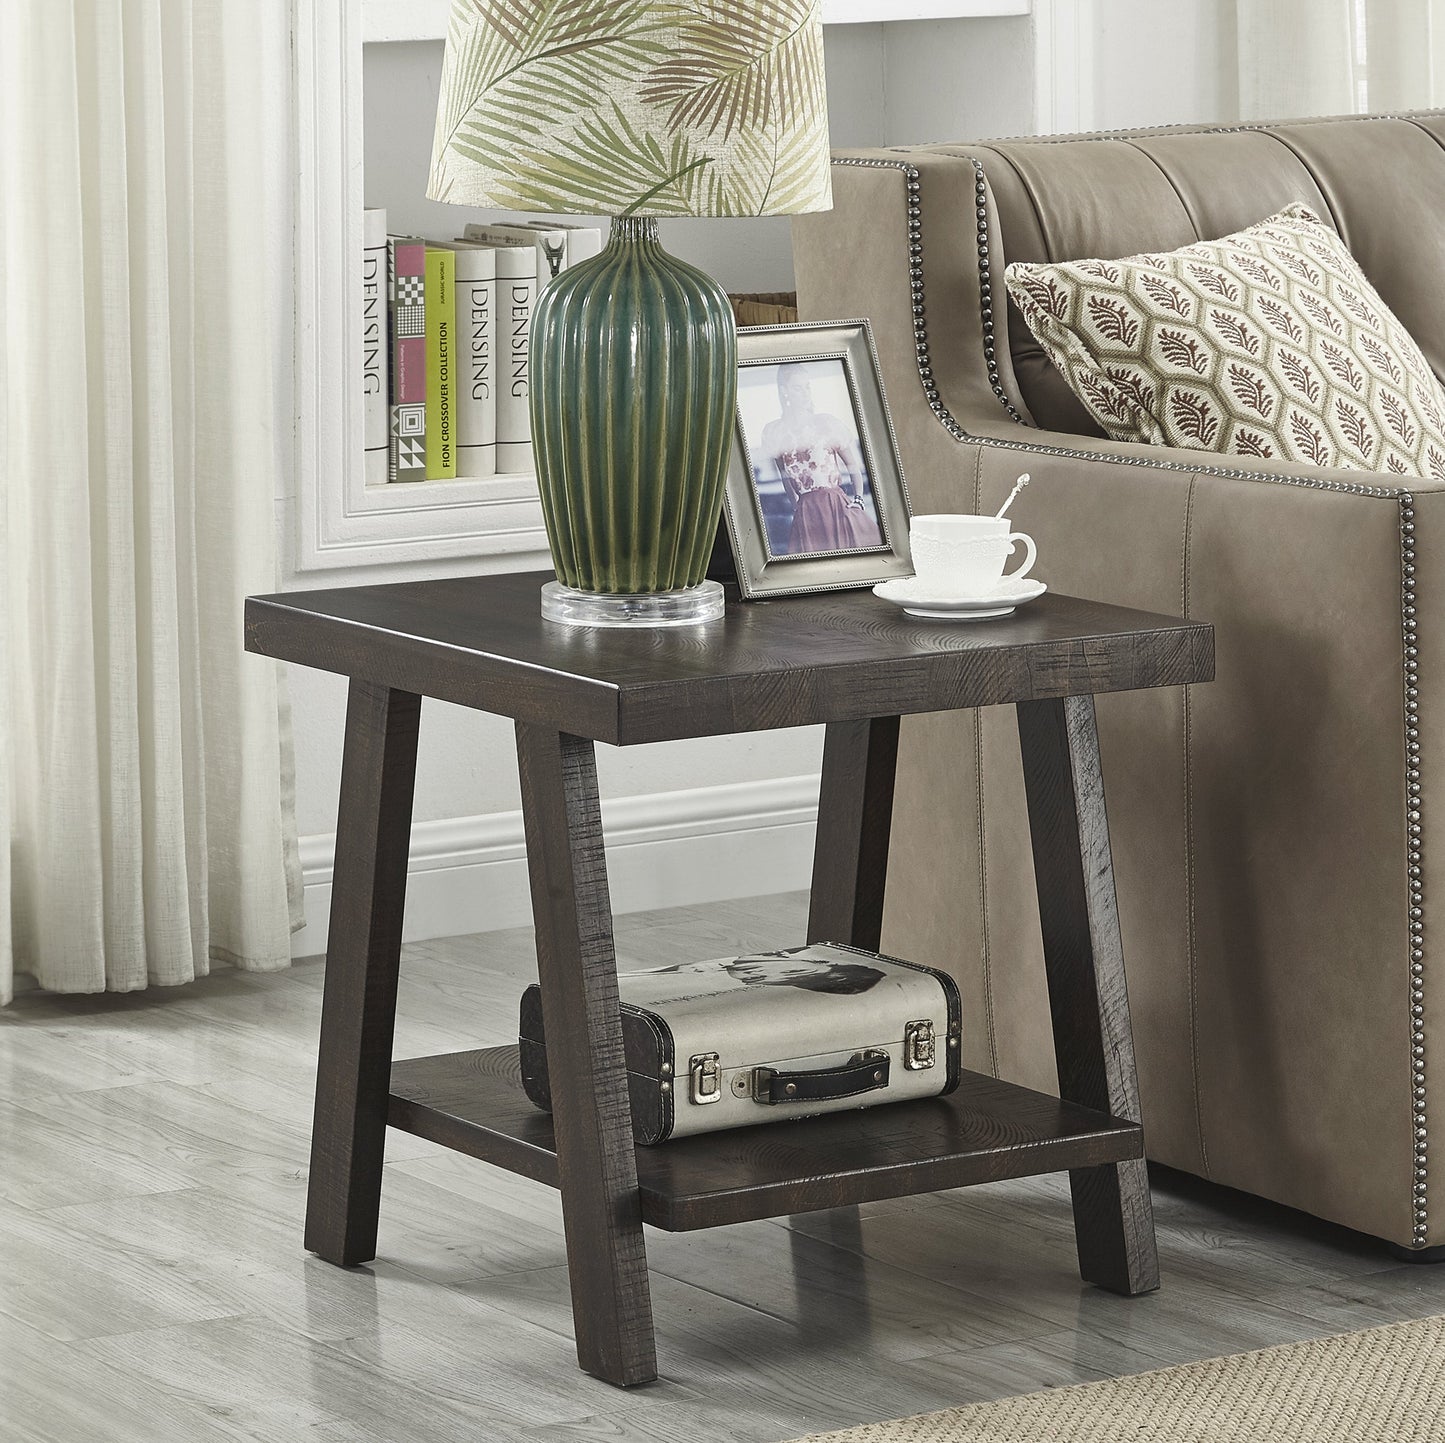 Athens Contemporary Wood Shelf End Table in Weathered Espresso